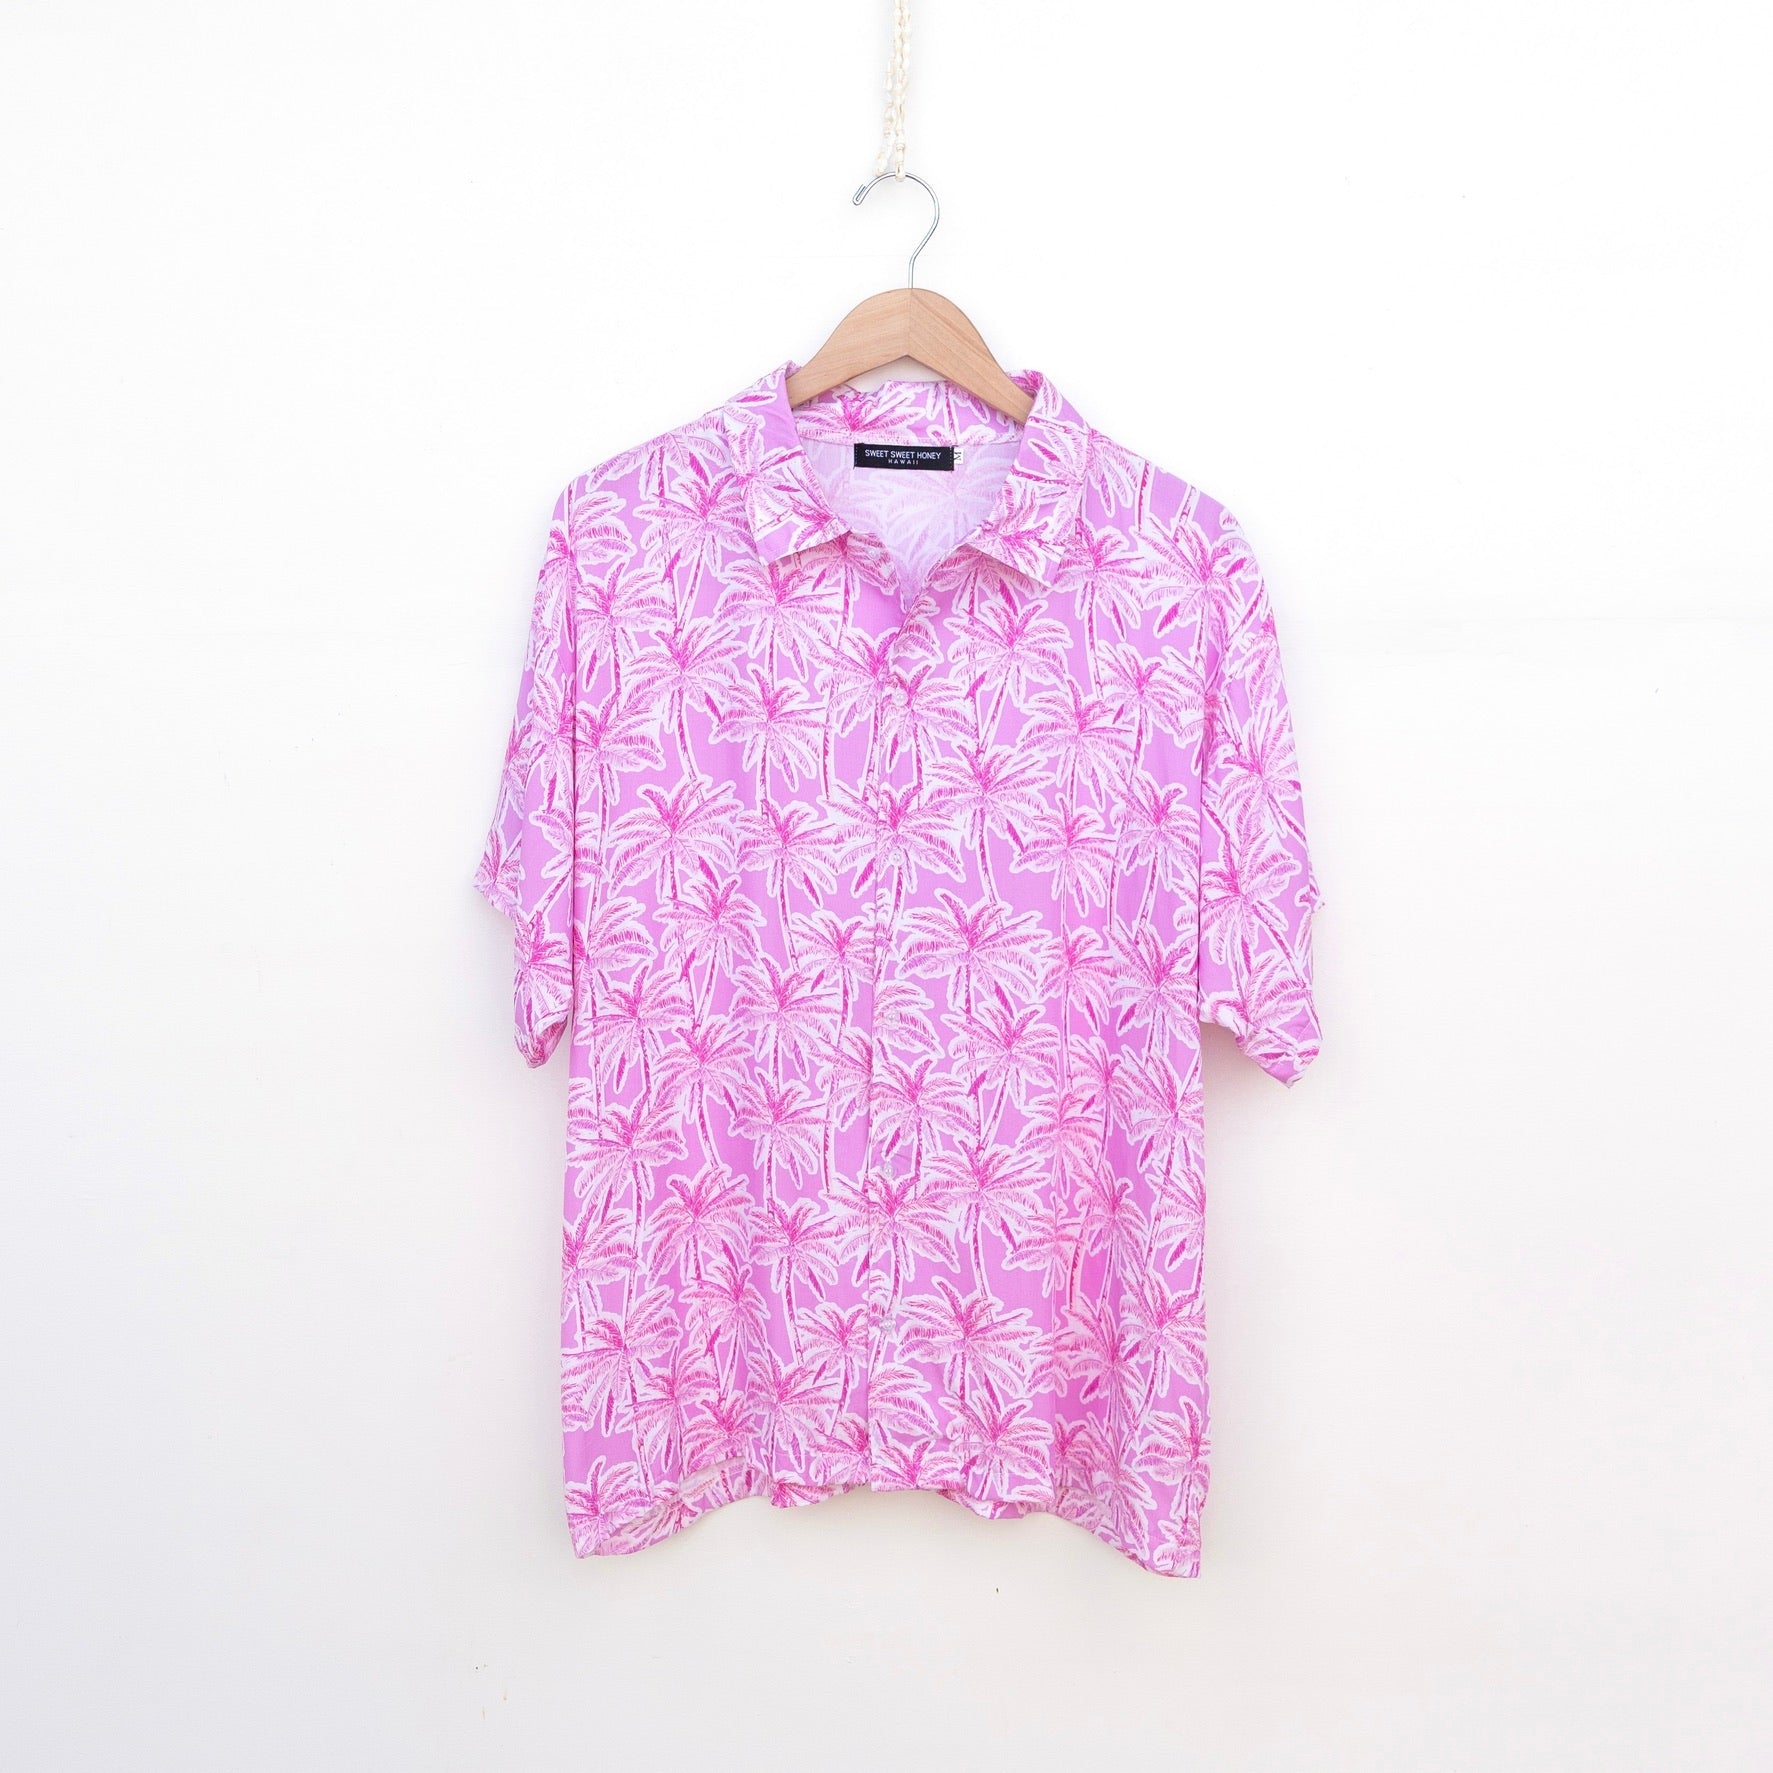 Unisexs Palm Tree|Purple Orchid button down Collared shirt - Sweet Sweet Honey Hawaii